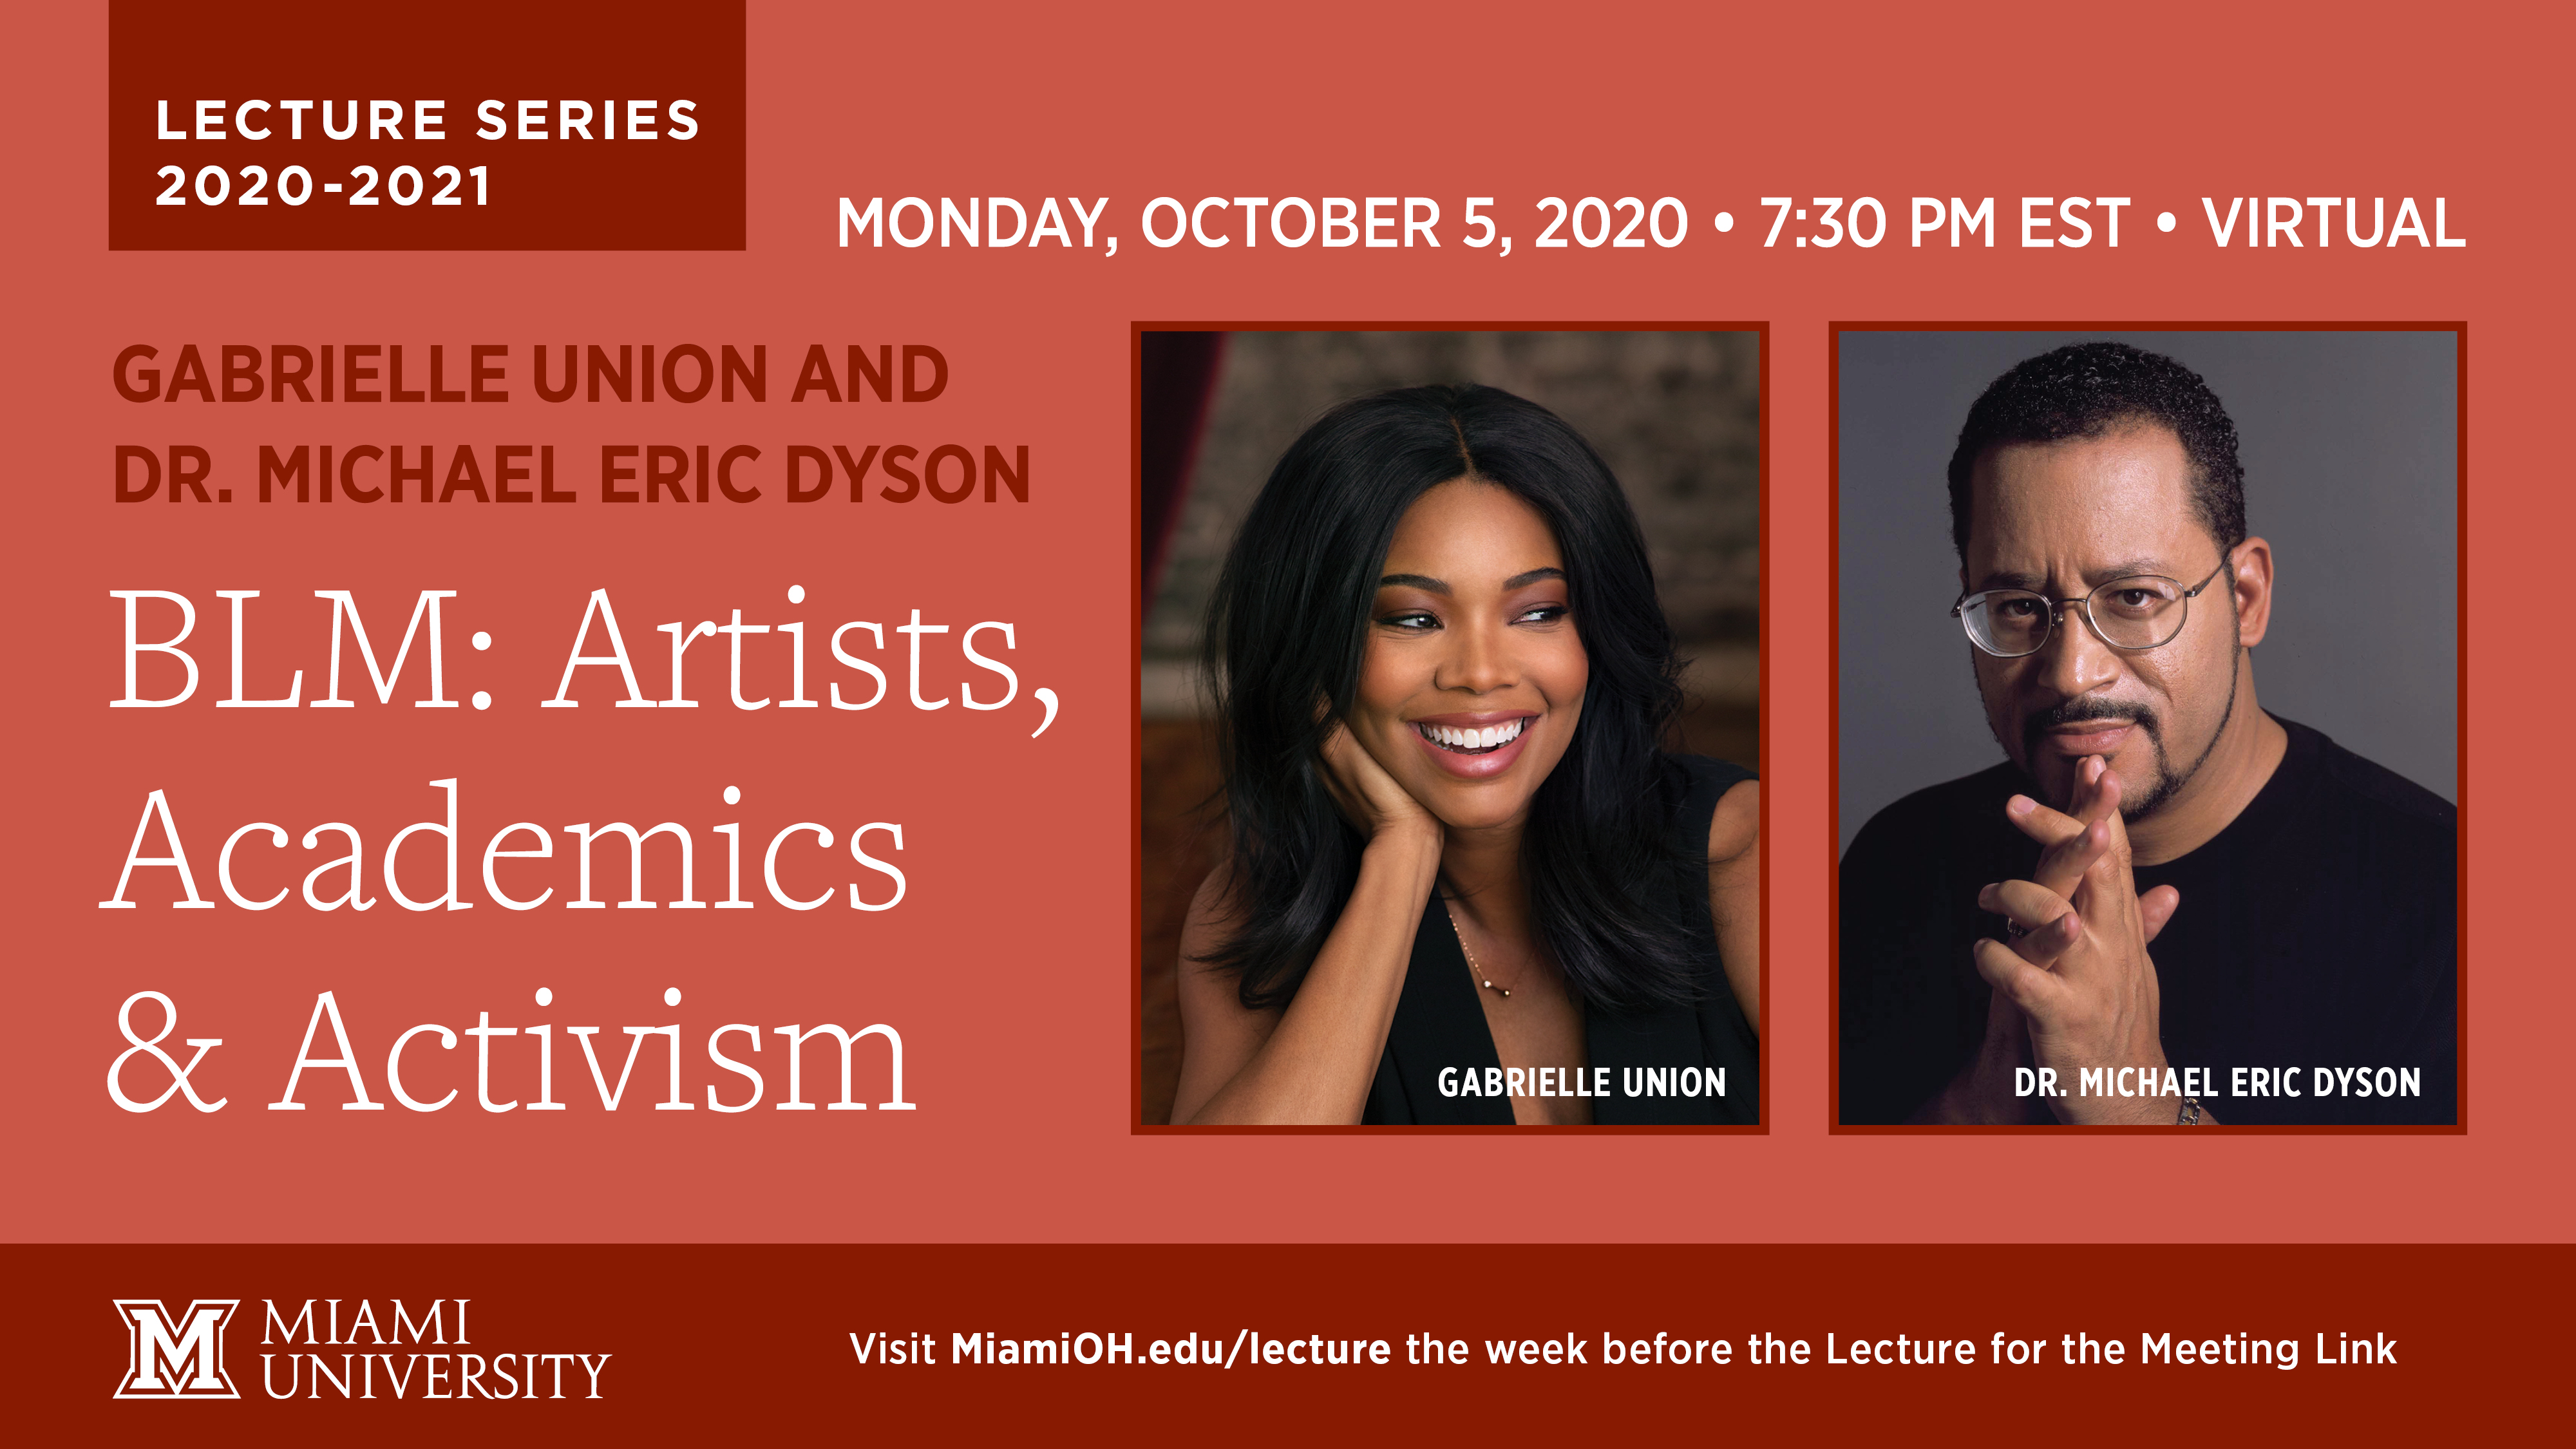 BLM: Artists, Academics & Activism Lecture Series with Gabrielle Union and Dr. Michael Eric Dyson